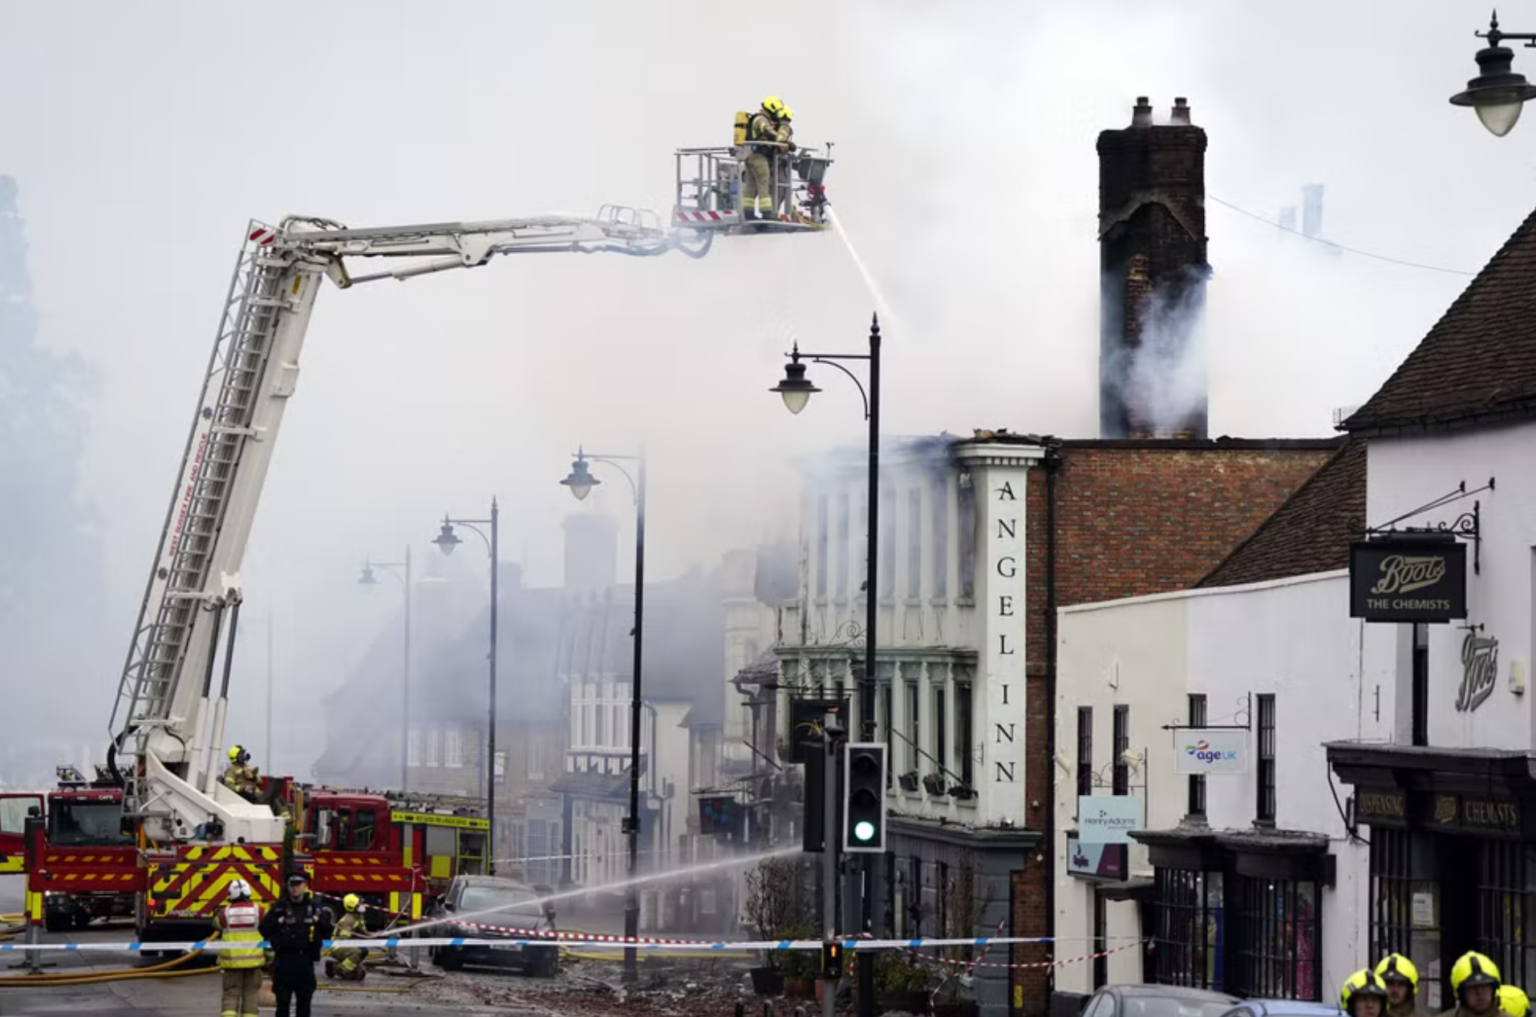 Firefighters dealing with a fire in Midhurst, West Sussex, which includes a 400-year-old hotel said to be housing Ukrainian refugees